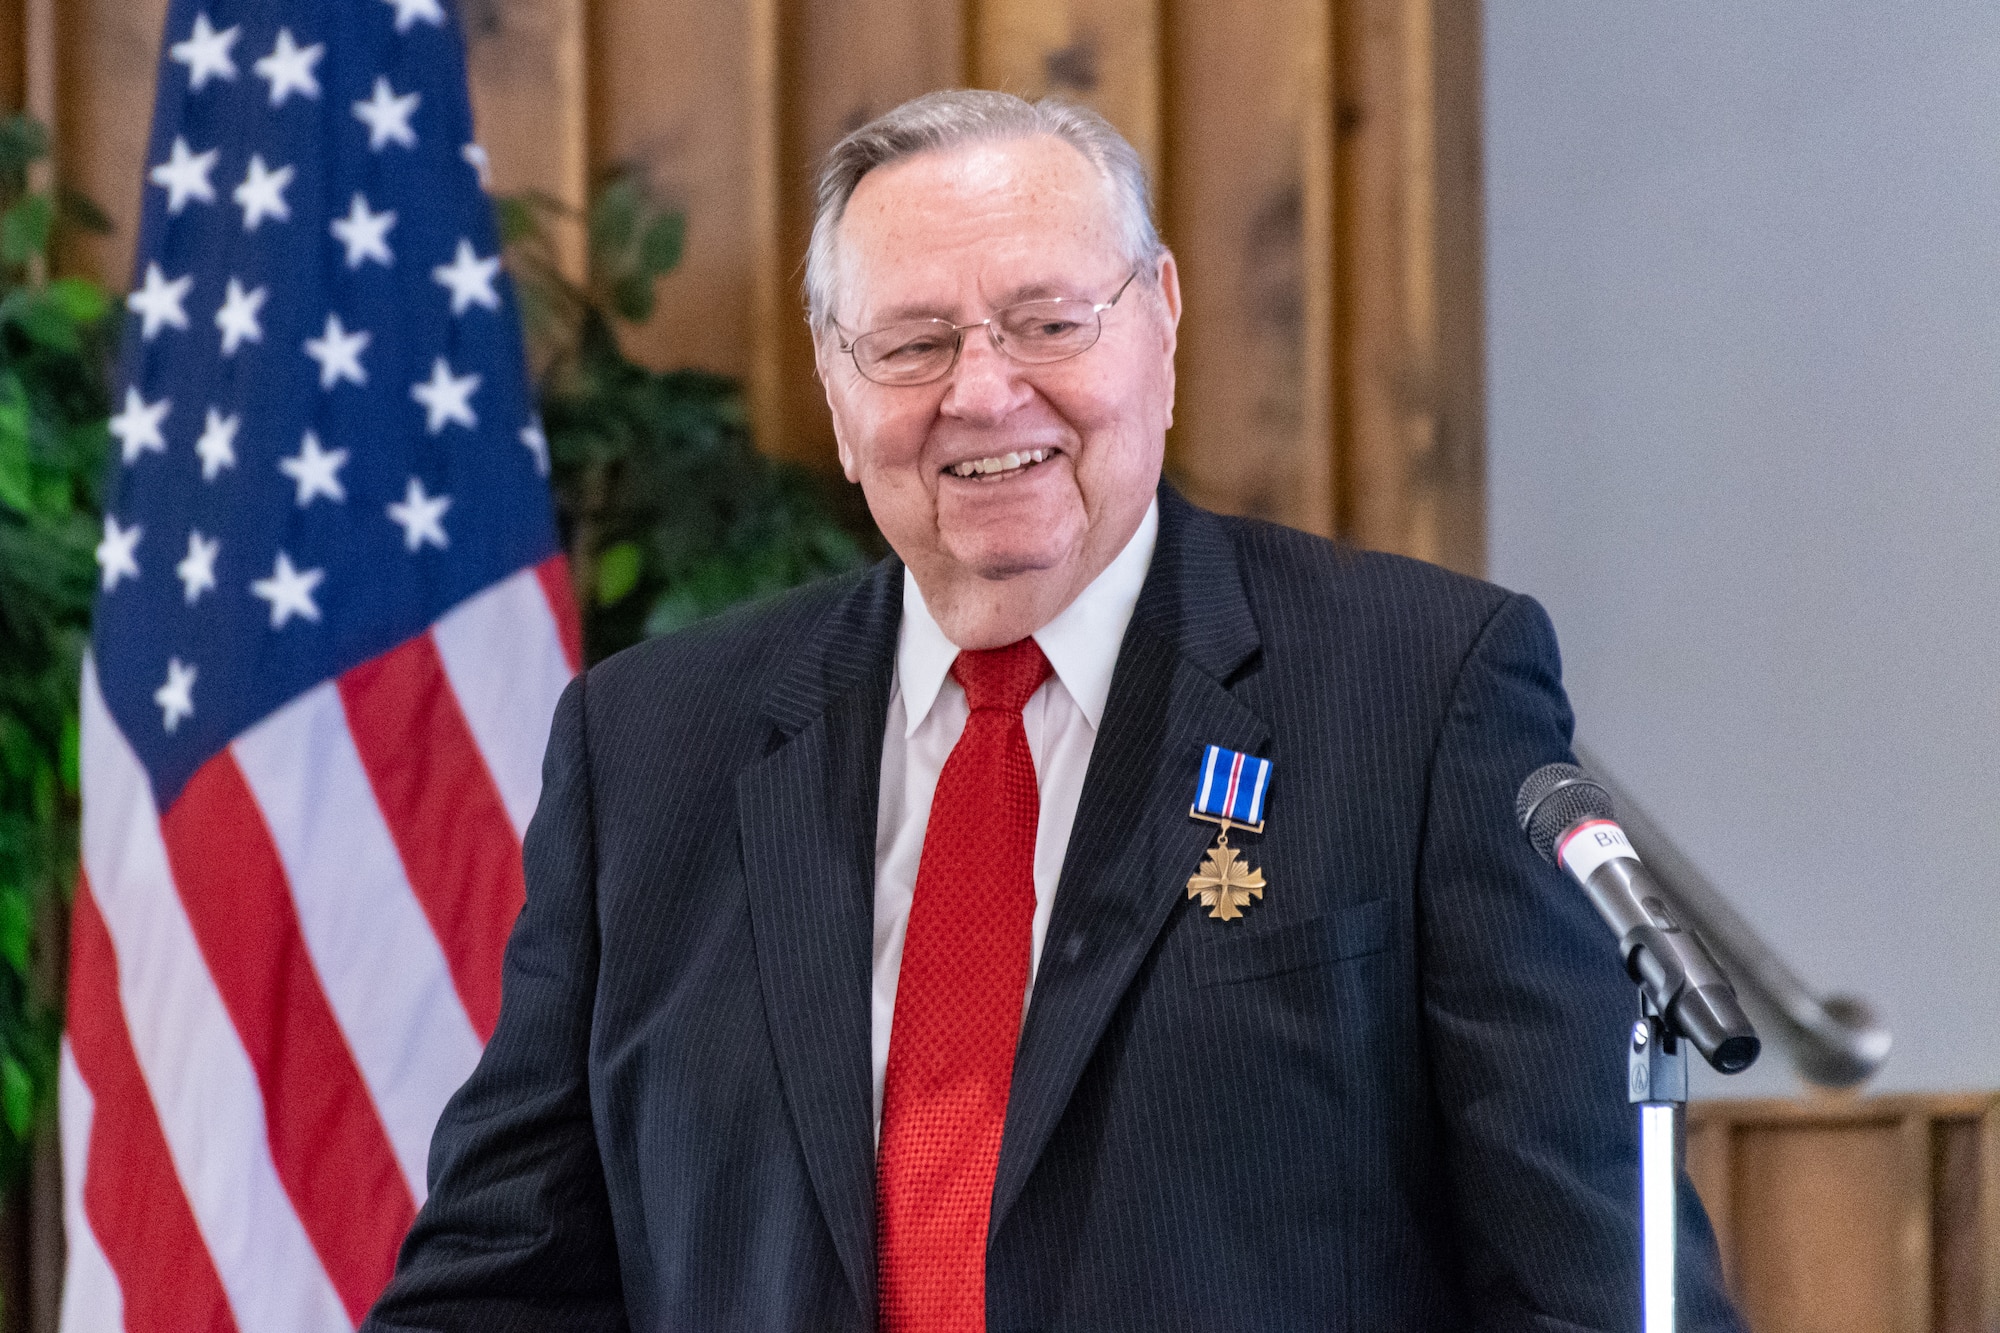 David Miller smiles as he gives a speech after being presented the Distinguished Flying Cross Award at Nacogdoches, Texas, Oct. 13, 2018. This presentation came 50 years after he earned the award for his actions during a tour in the Vietnam War. During his time there, he intercepted enemy radio communications that saved countless American lives. (U.S. Air Force photo by Tech. Sgt. Cody Burt/Released)